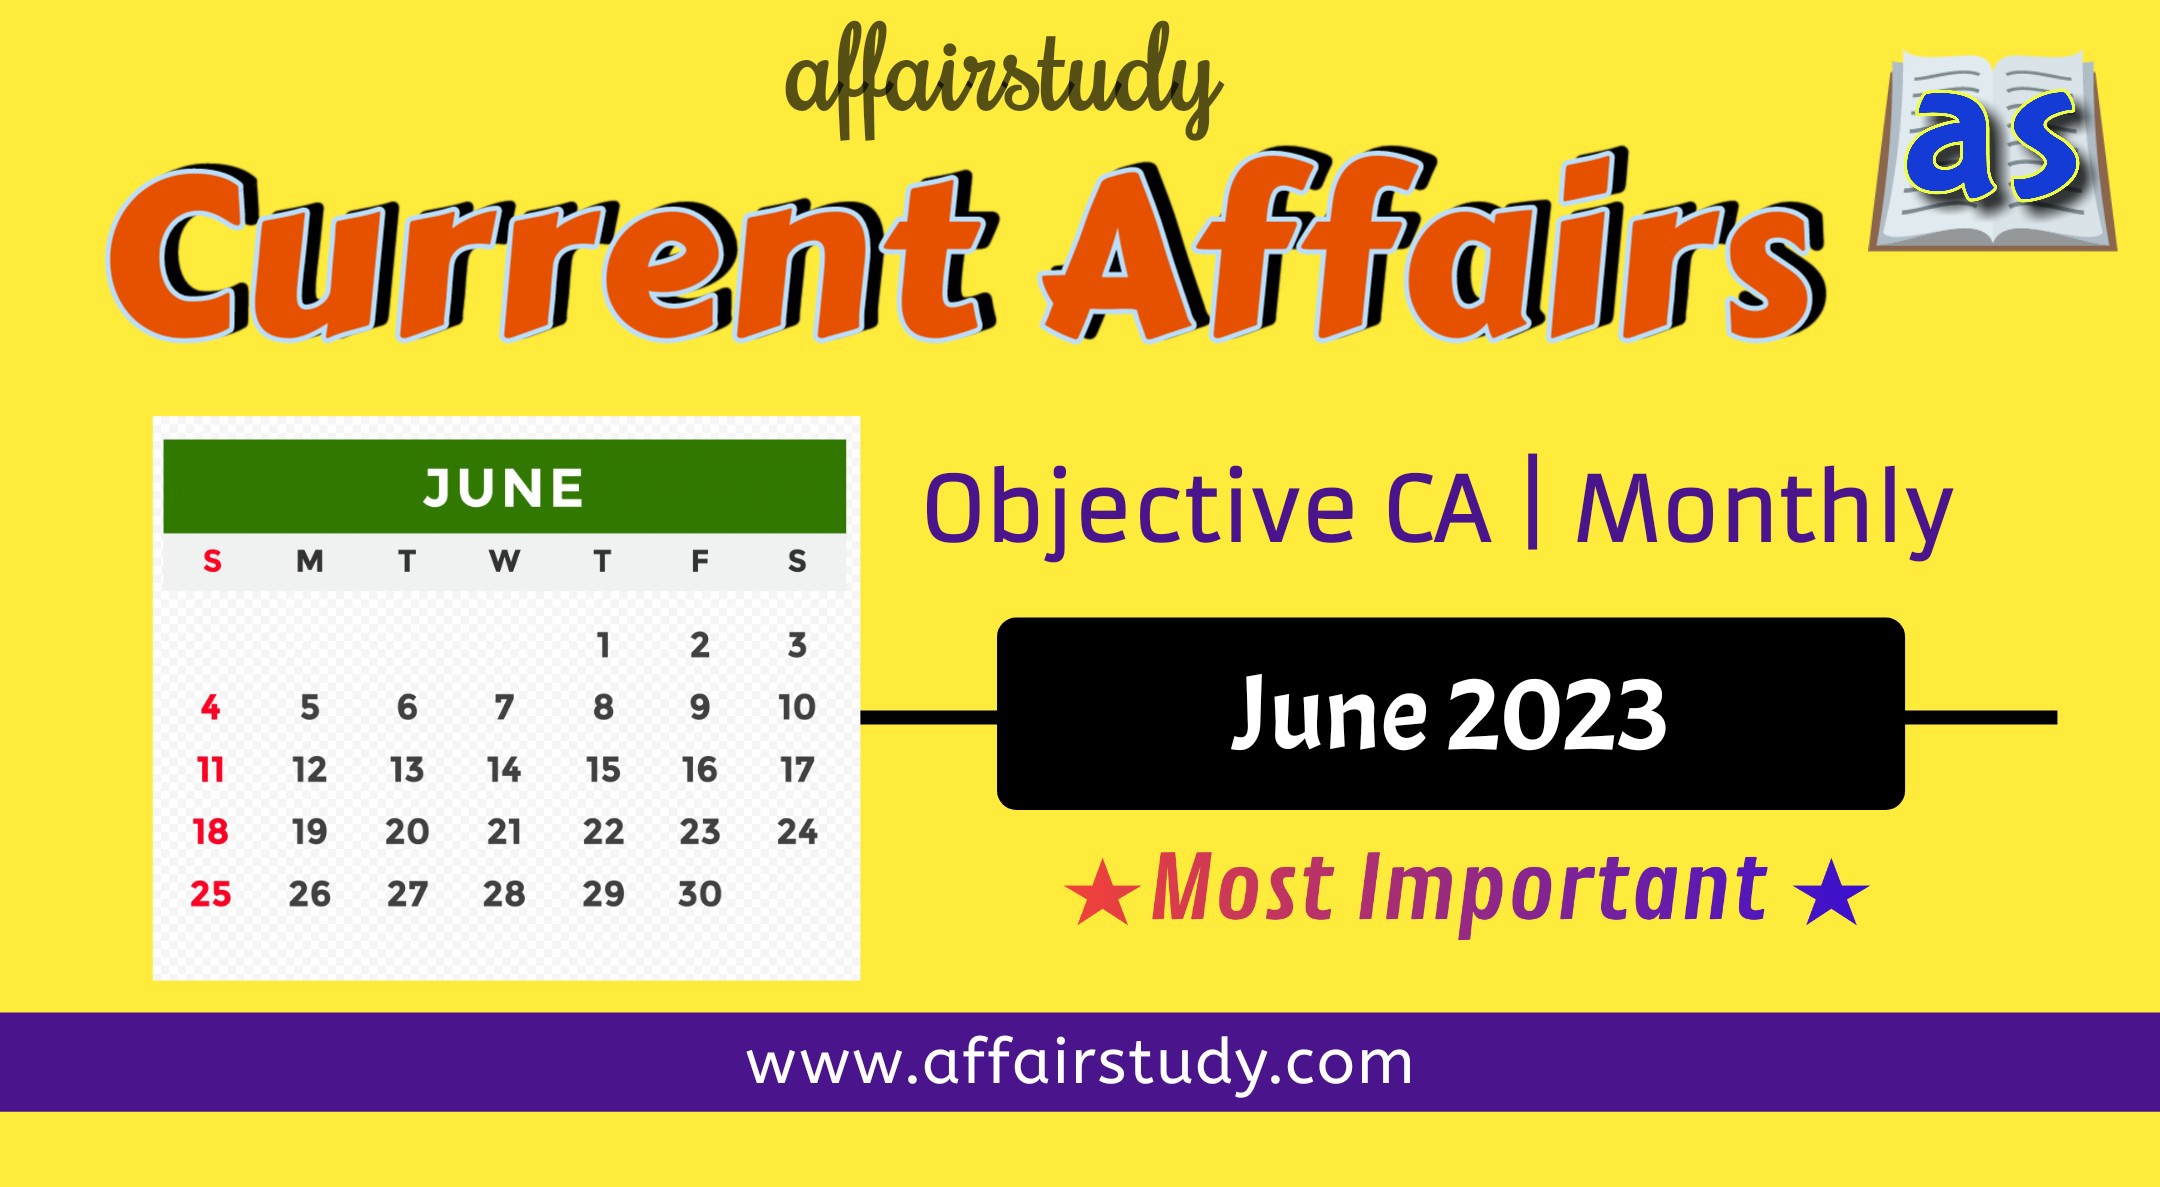 June 2023 Monthly Objective CA